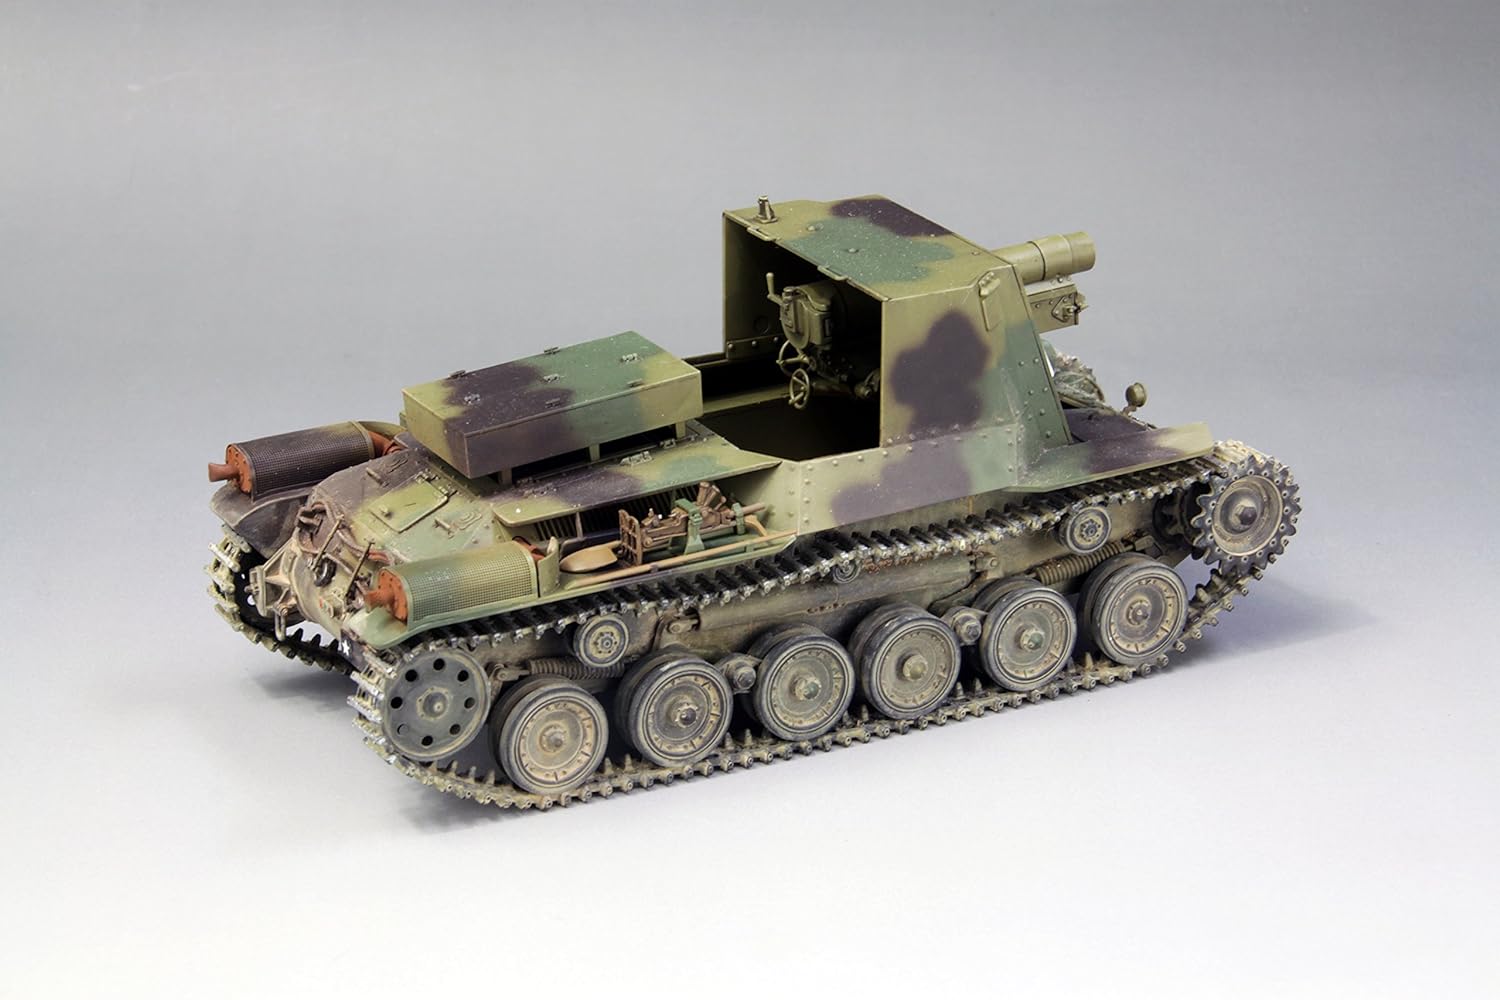 FM54 1/35 Scale Military Series Imperial Army Type 4 Self-Propelled Gun